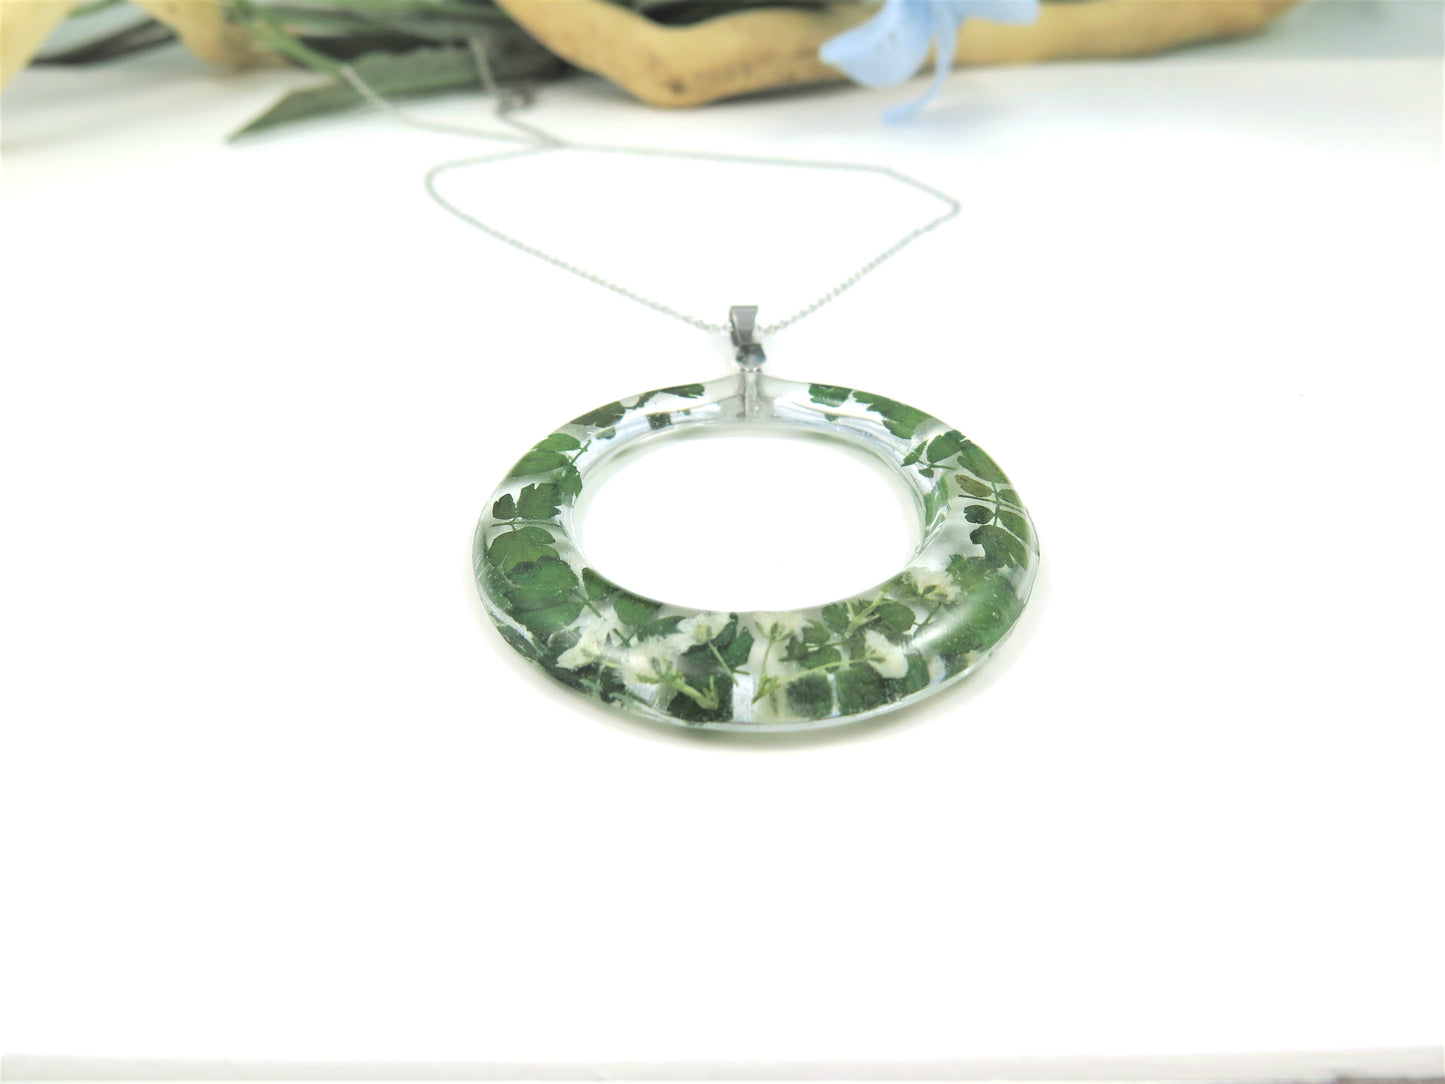 Real Flower Resin Necklace, Pressed Flower necklace, Fern and babys breath flowers